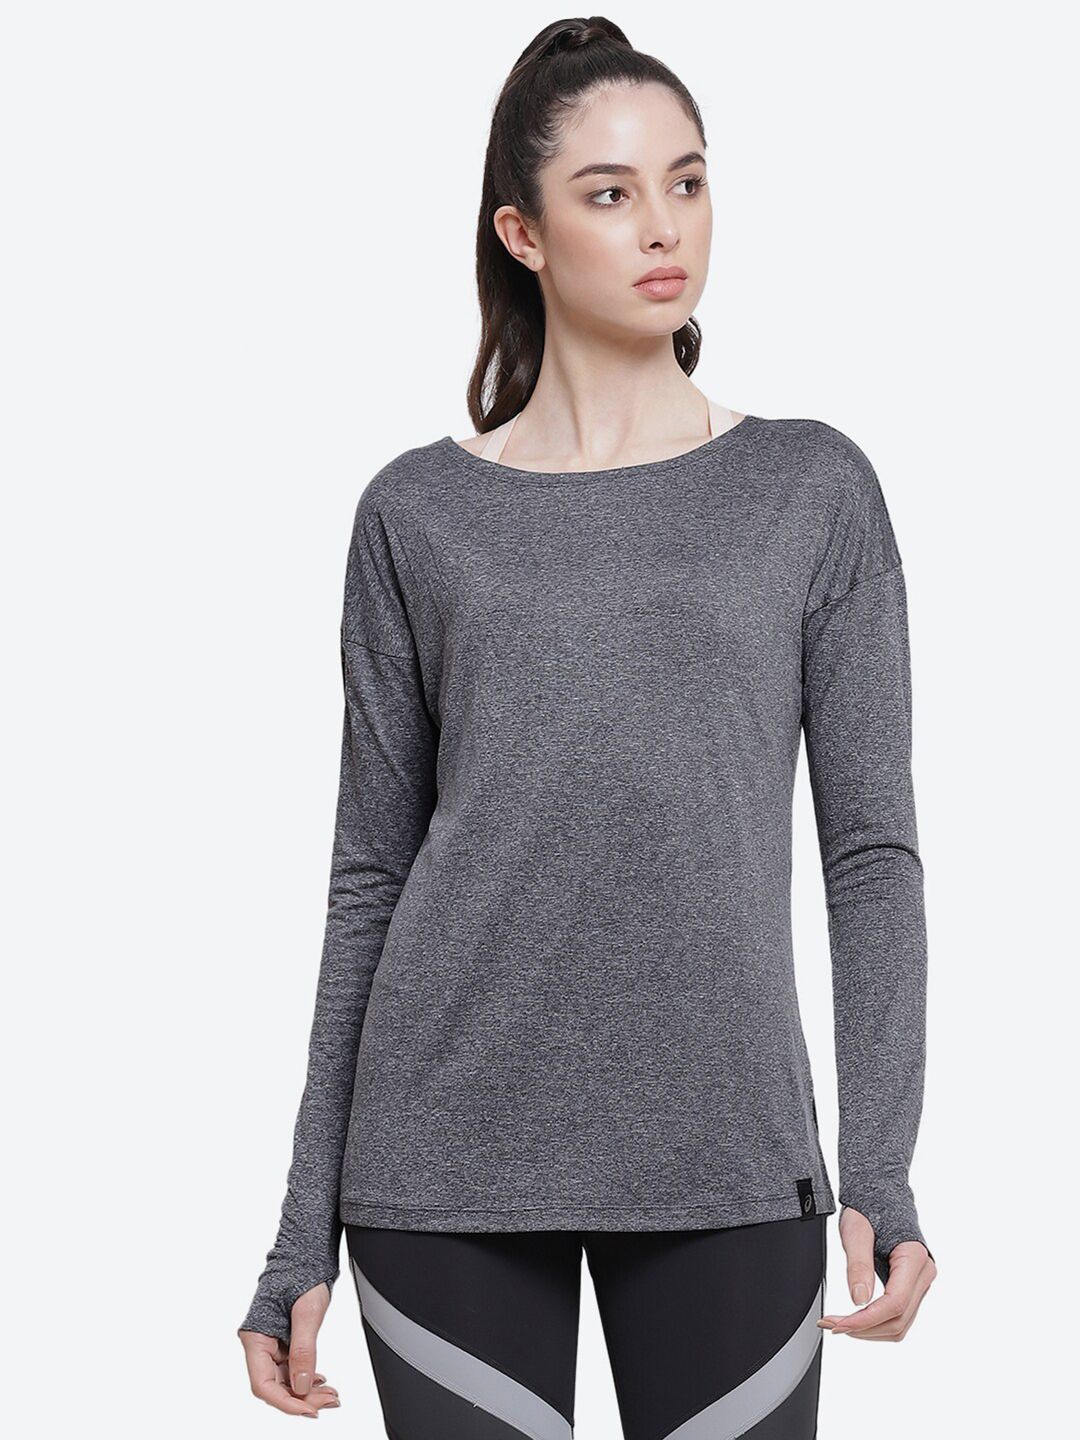 ASICS Women Charcoal Grey W LS Sports T-shirt Price in India